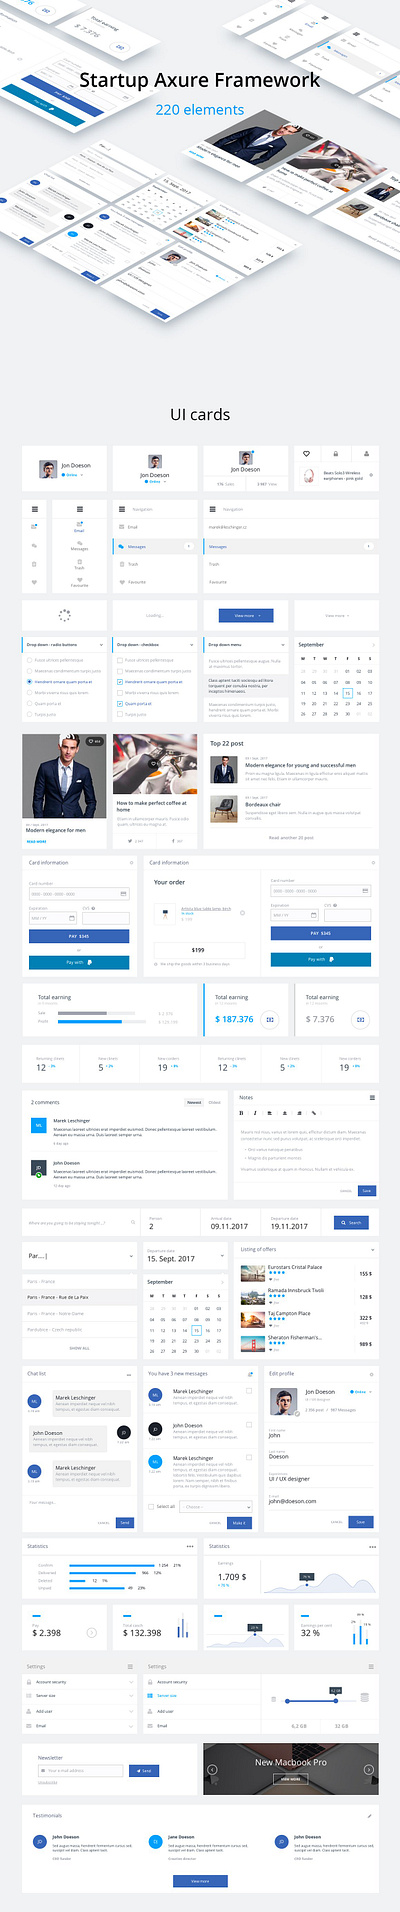 Startup Axure Template-220 elements axure framework startup template theme ui ui design ui kit ux ux design wireframe